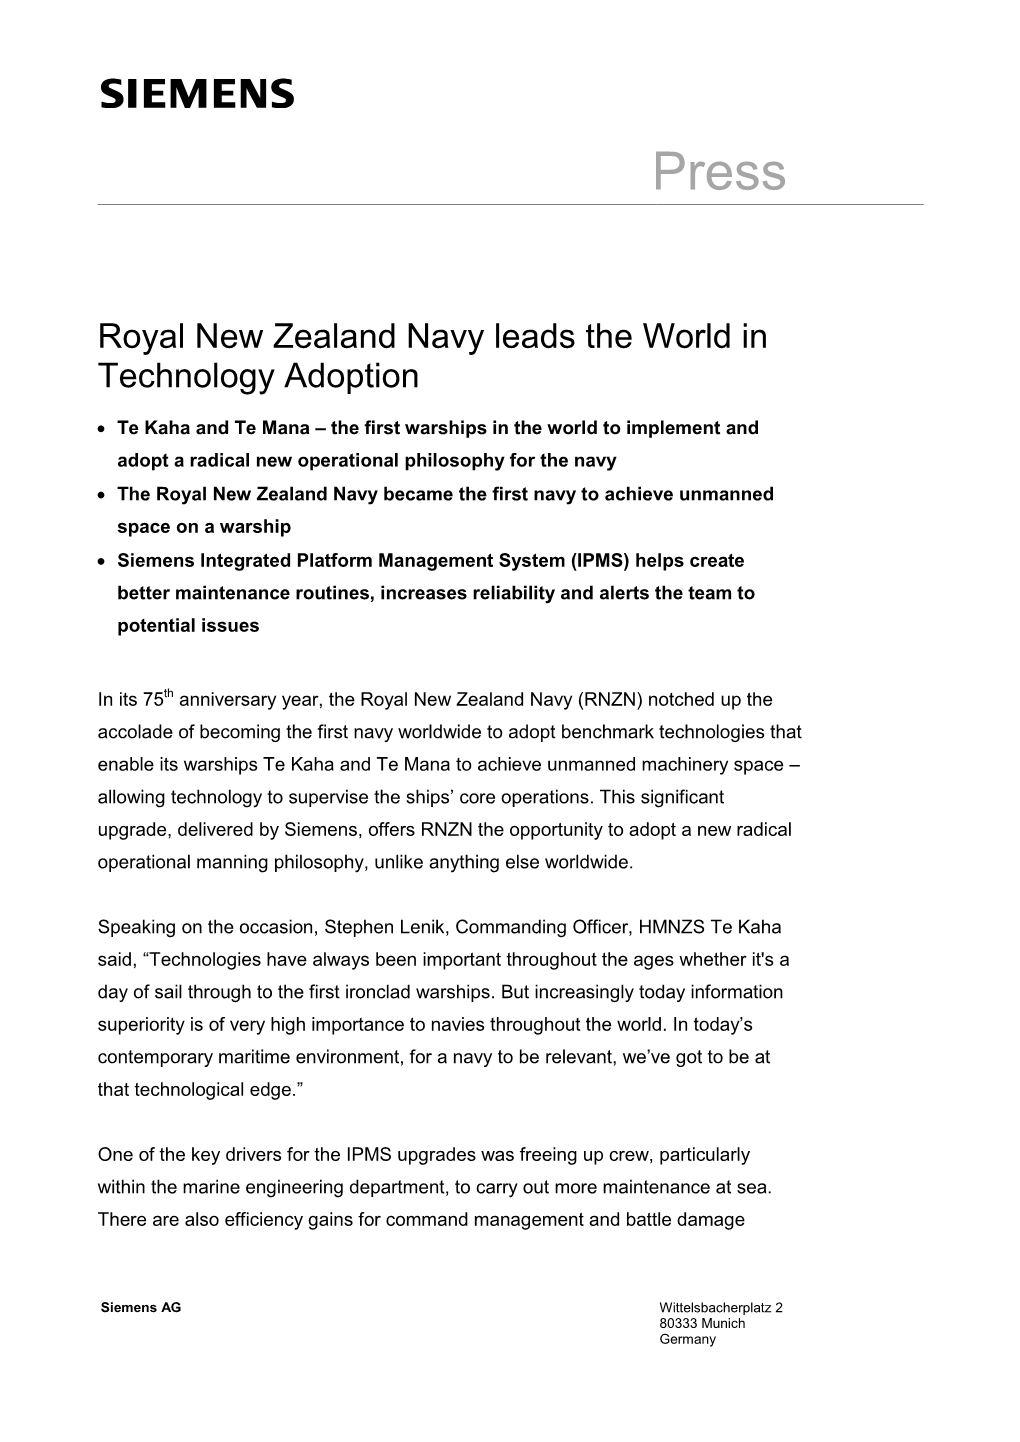 Royal New Zealand Navy Leads the World in Technology Adoption